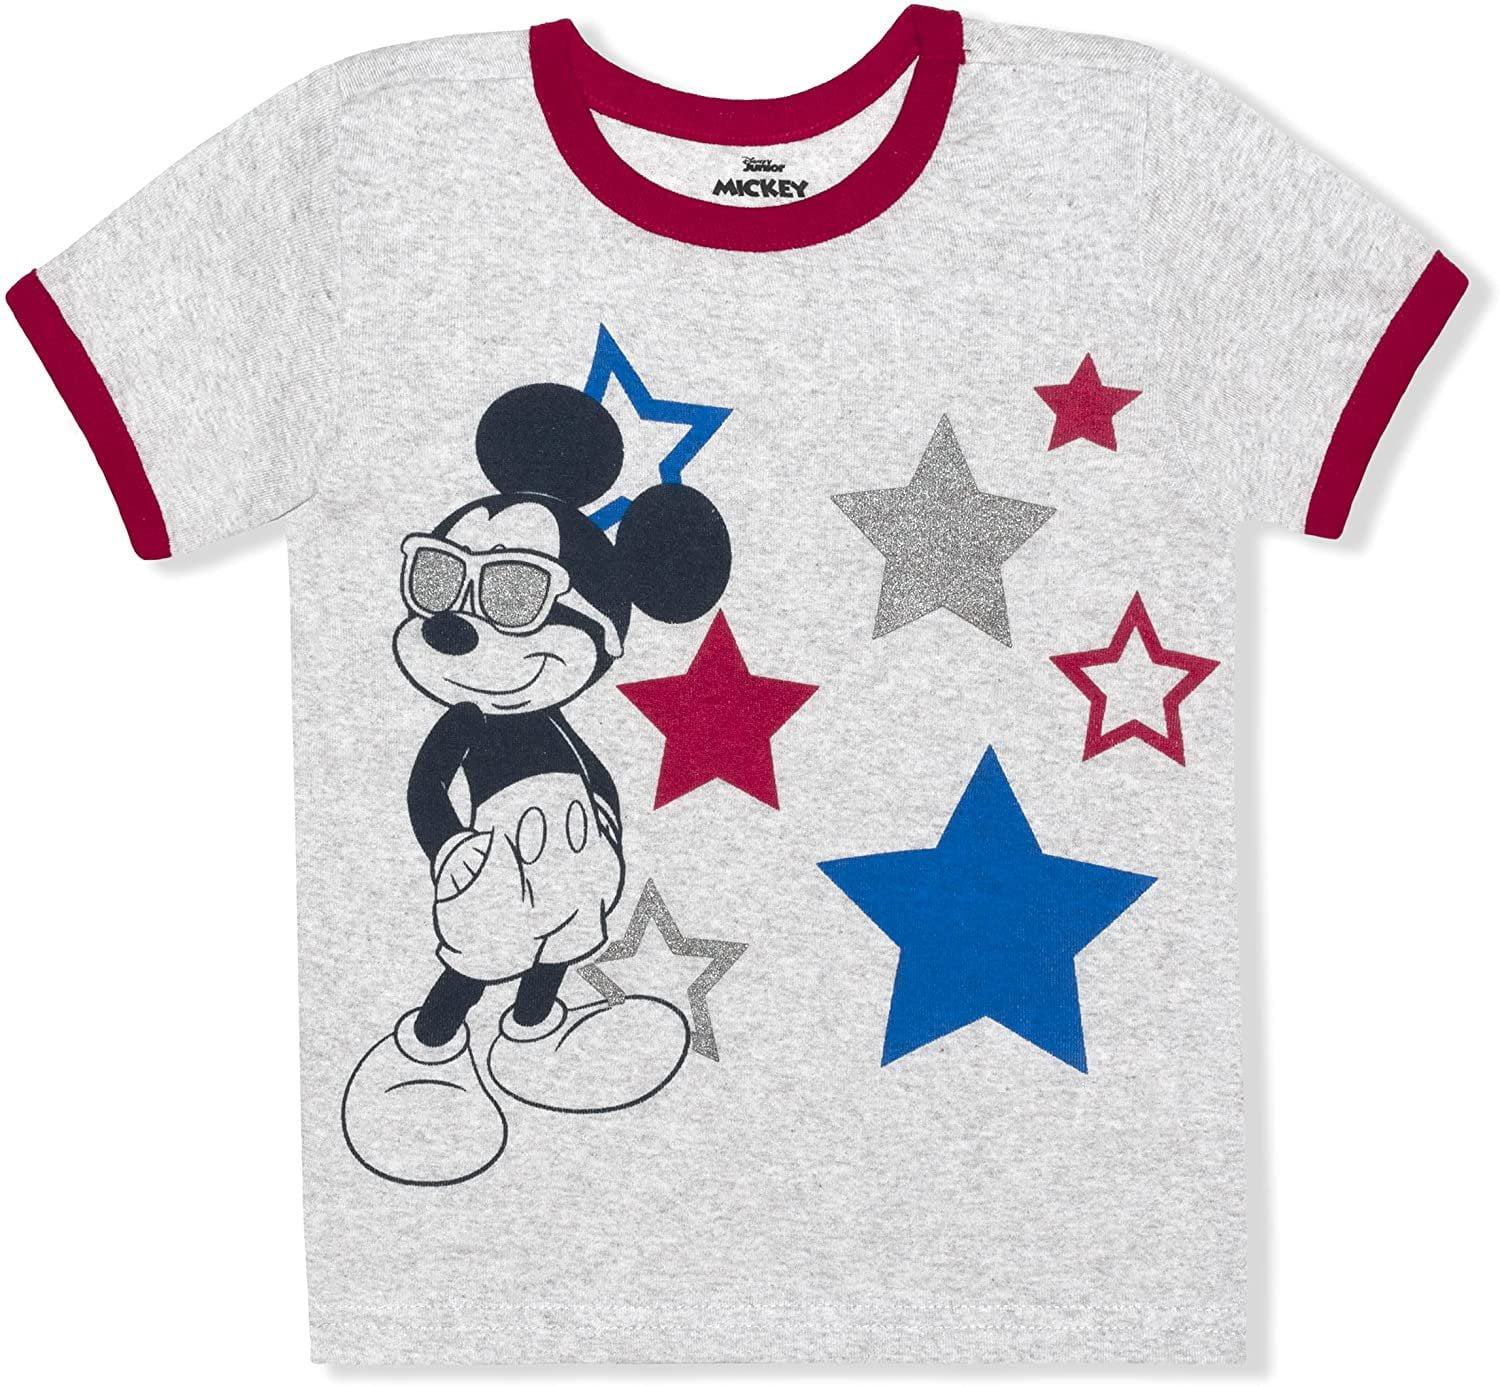 Old Navy Boys Girls 12-18 MONTHS Disney MICKEY MOUSE Christmas Shirt RED #104218 